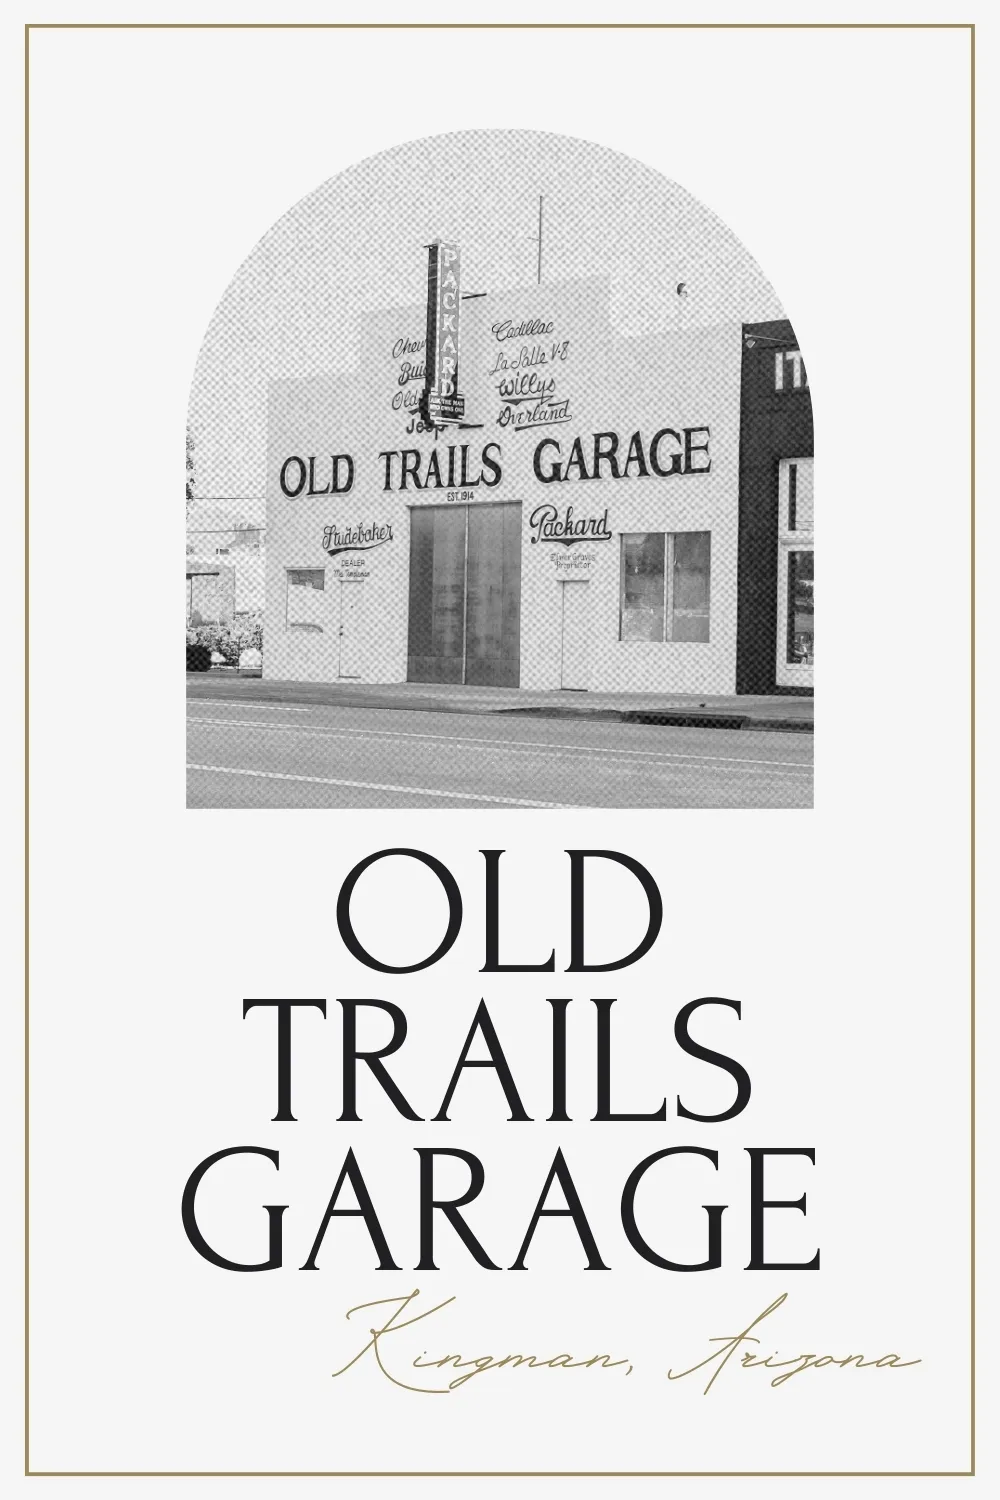 The Old Trails Garage in Kingman, Arizona has stood in this location since 1915. It was built by J.W. Thompson for M.G. Wagner who originally had operated the business on South Front Street (now Topeka Street). Prior to the expanse of Route 66, Old Trails Garage sat on National Old Trails Road and provided service and repairs for the vehicles that traveled through. Visit this refurbished roadside attraction on your Route 66 road trip. #Route66 #Route66RoadTrip #Arizona #ArizonaRoadTrip